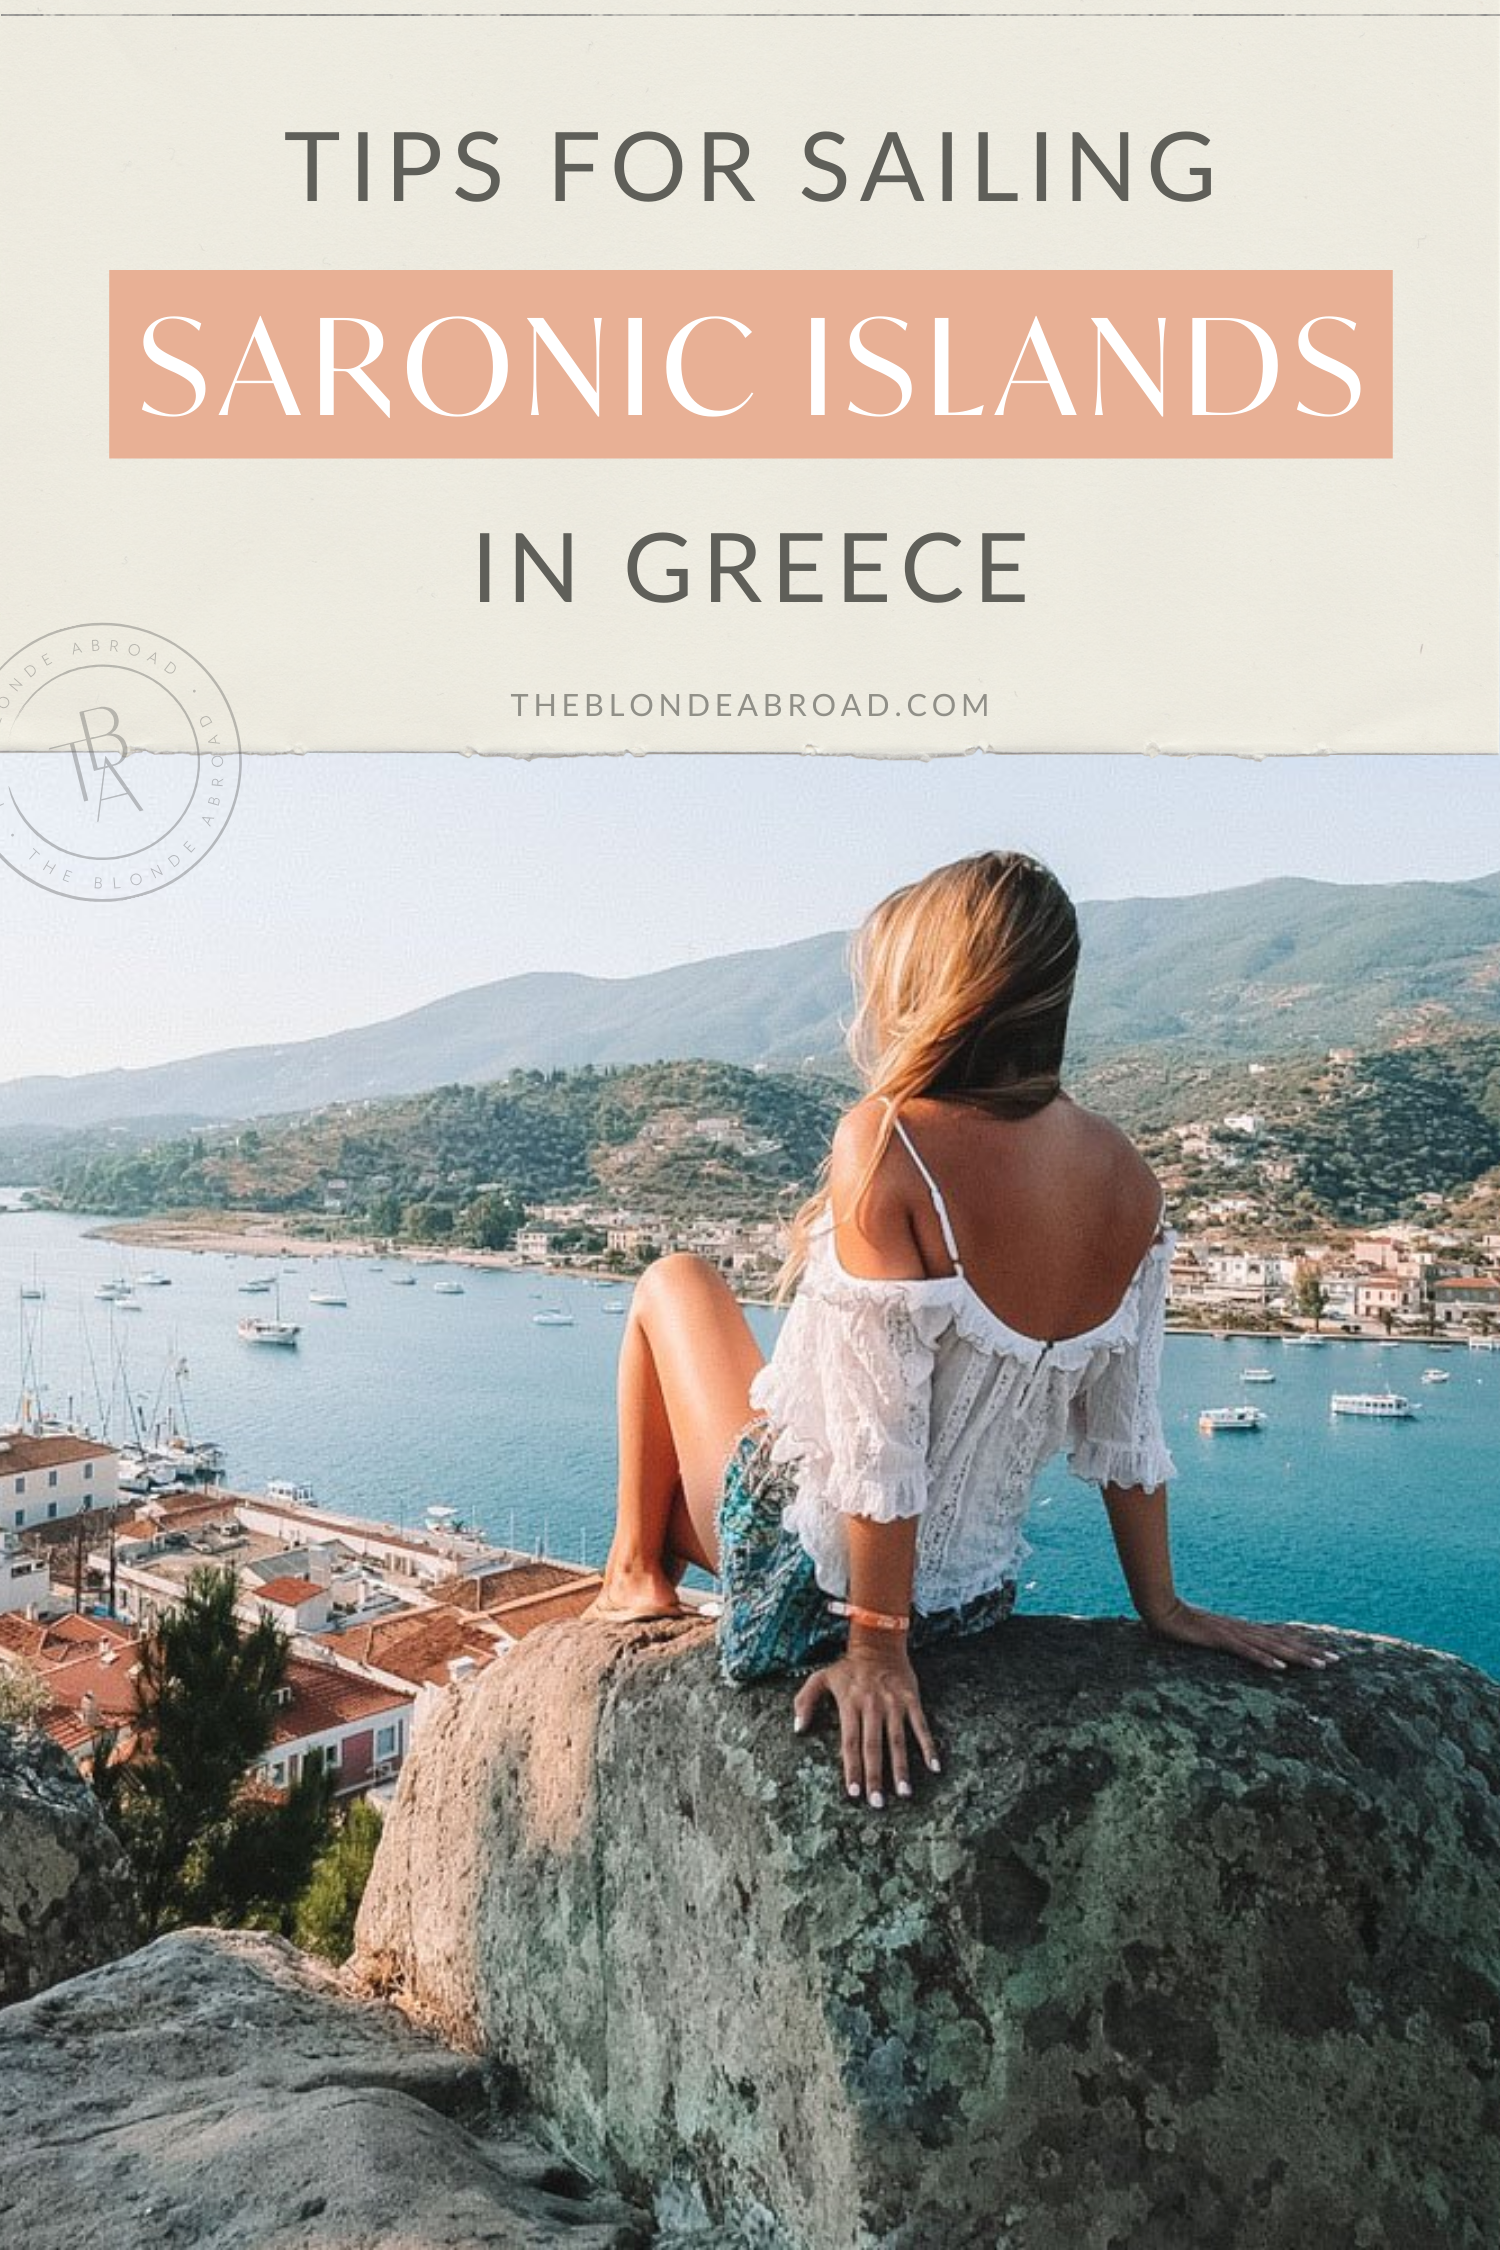 Tips for Sailing the Saronic Islands in Greece